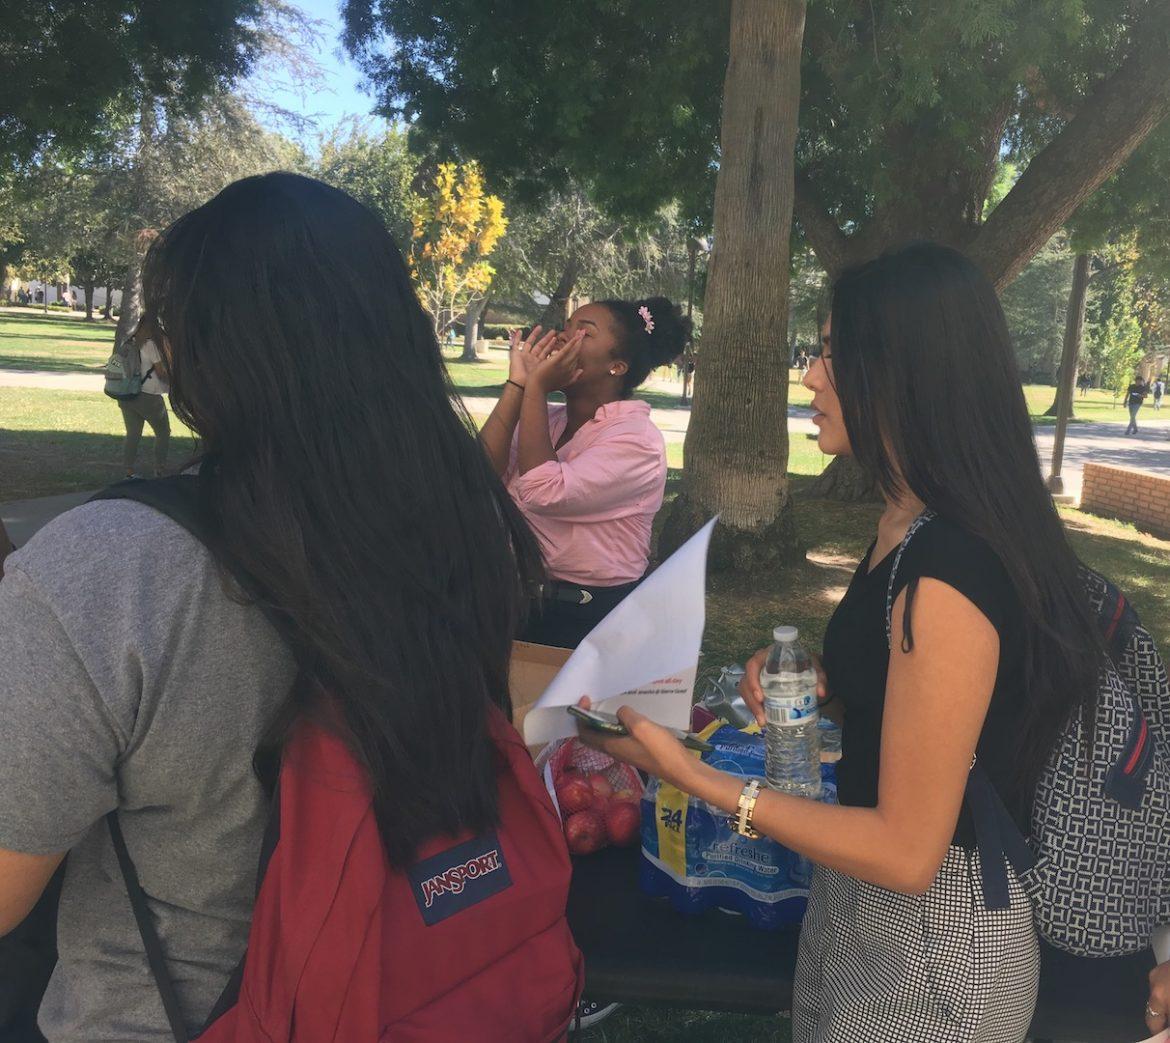 students in line for food in grass area